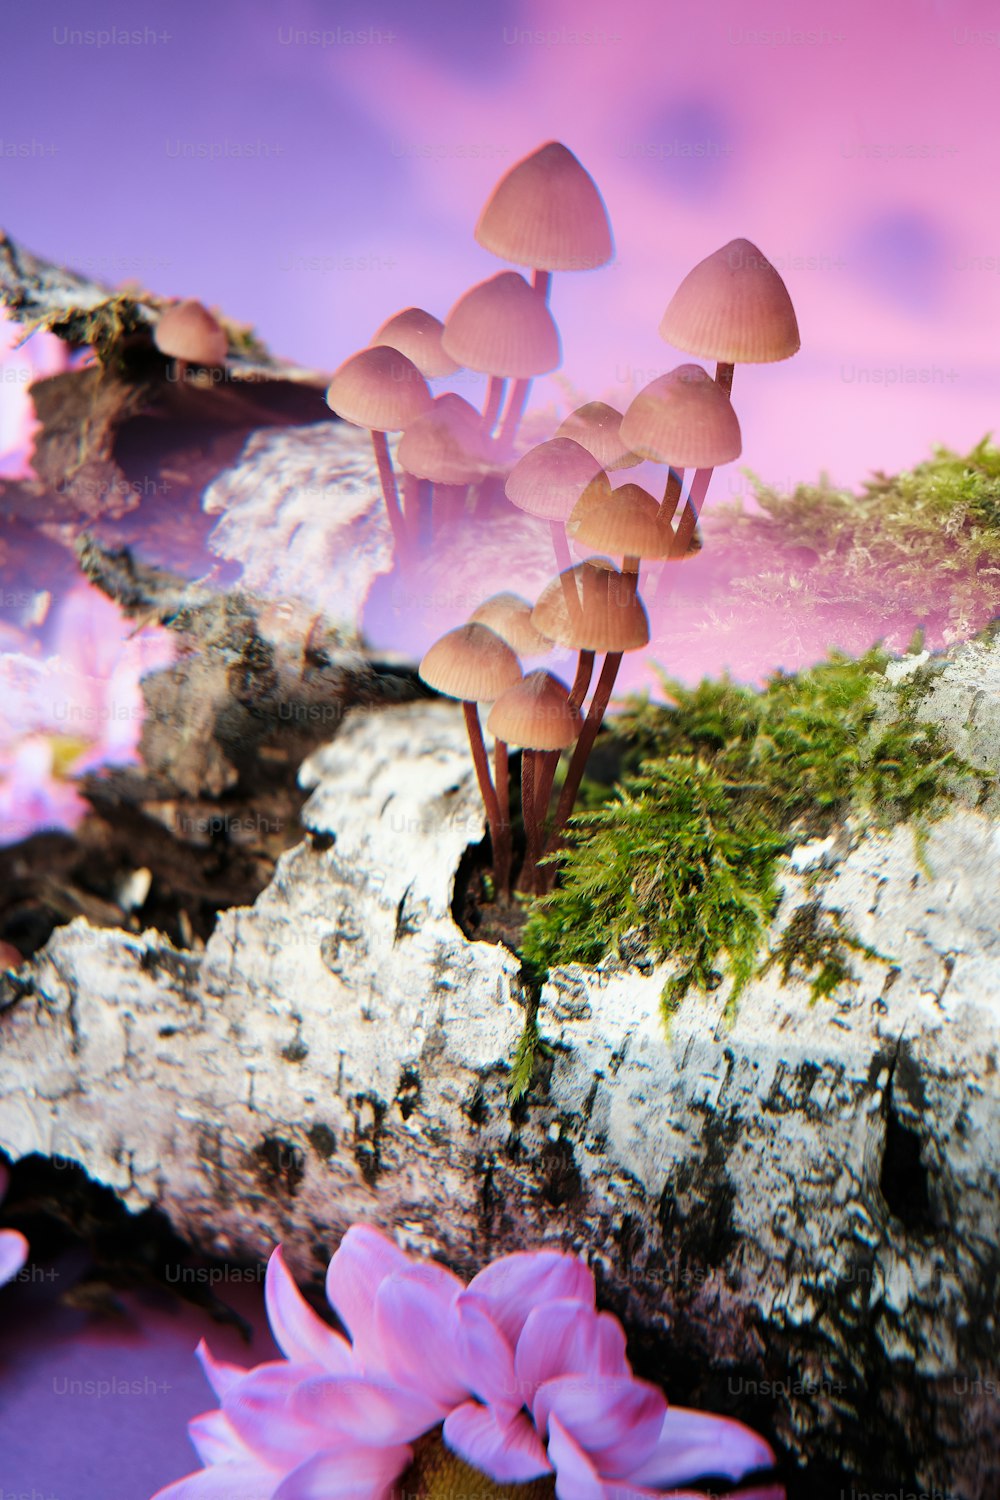 a group of mushrooms sitting on top of a rock